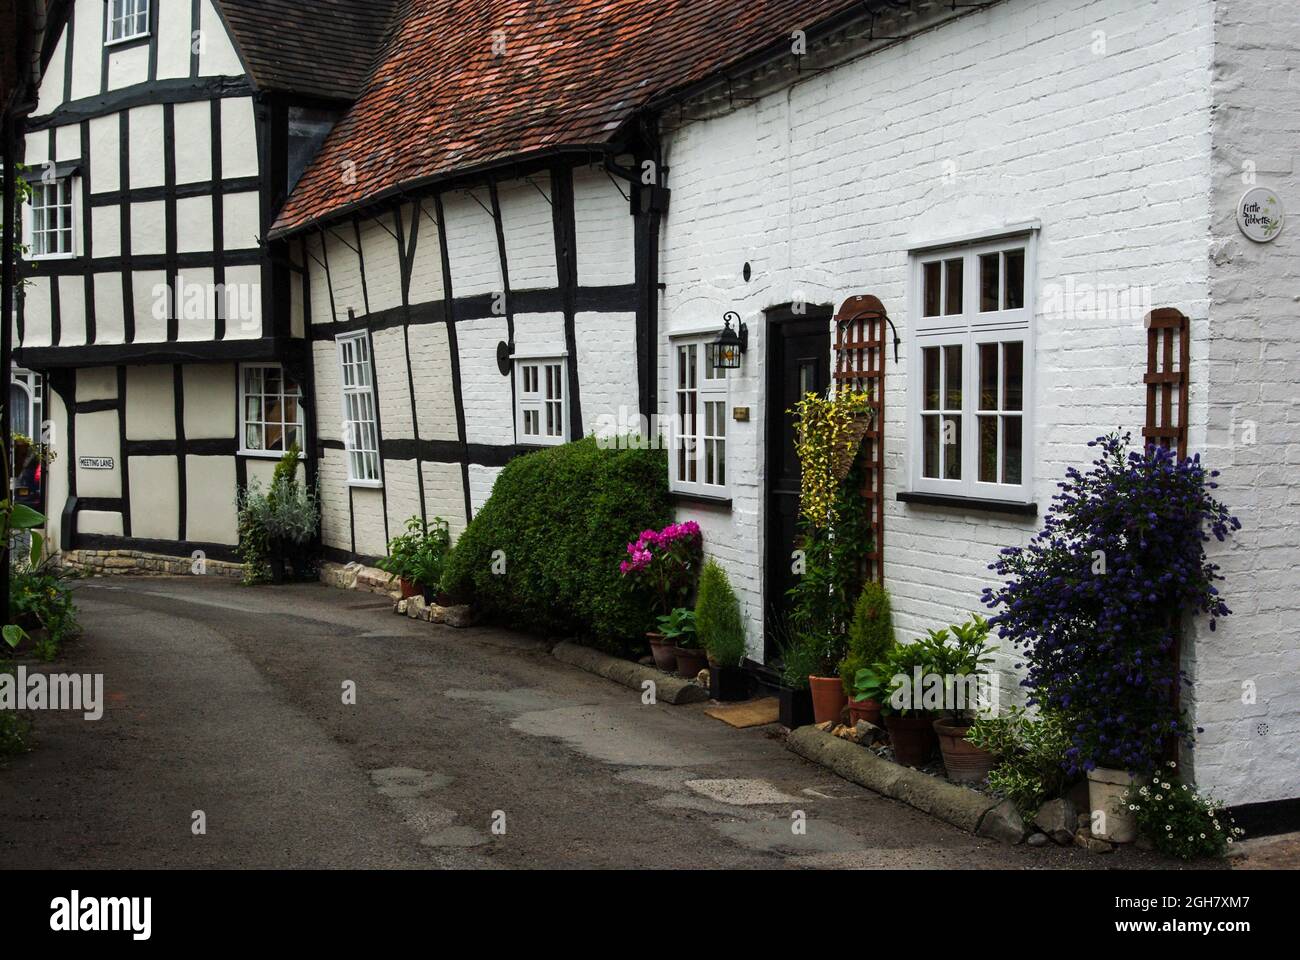 Early 17th century timber framed property in Meeting Lane, Alcester, Warwickshire, UK Stock Photo